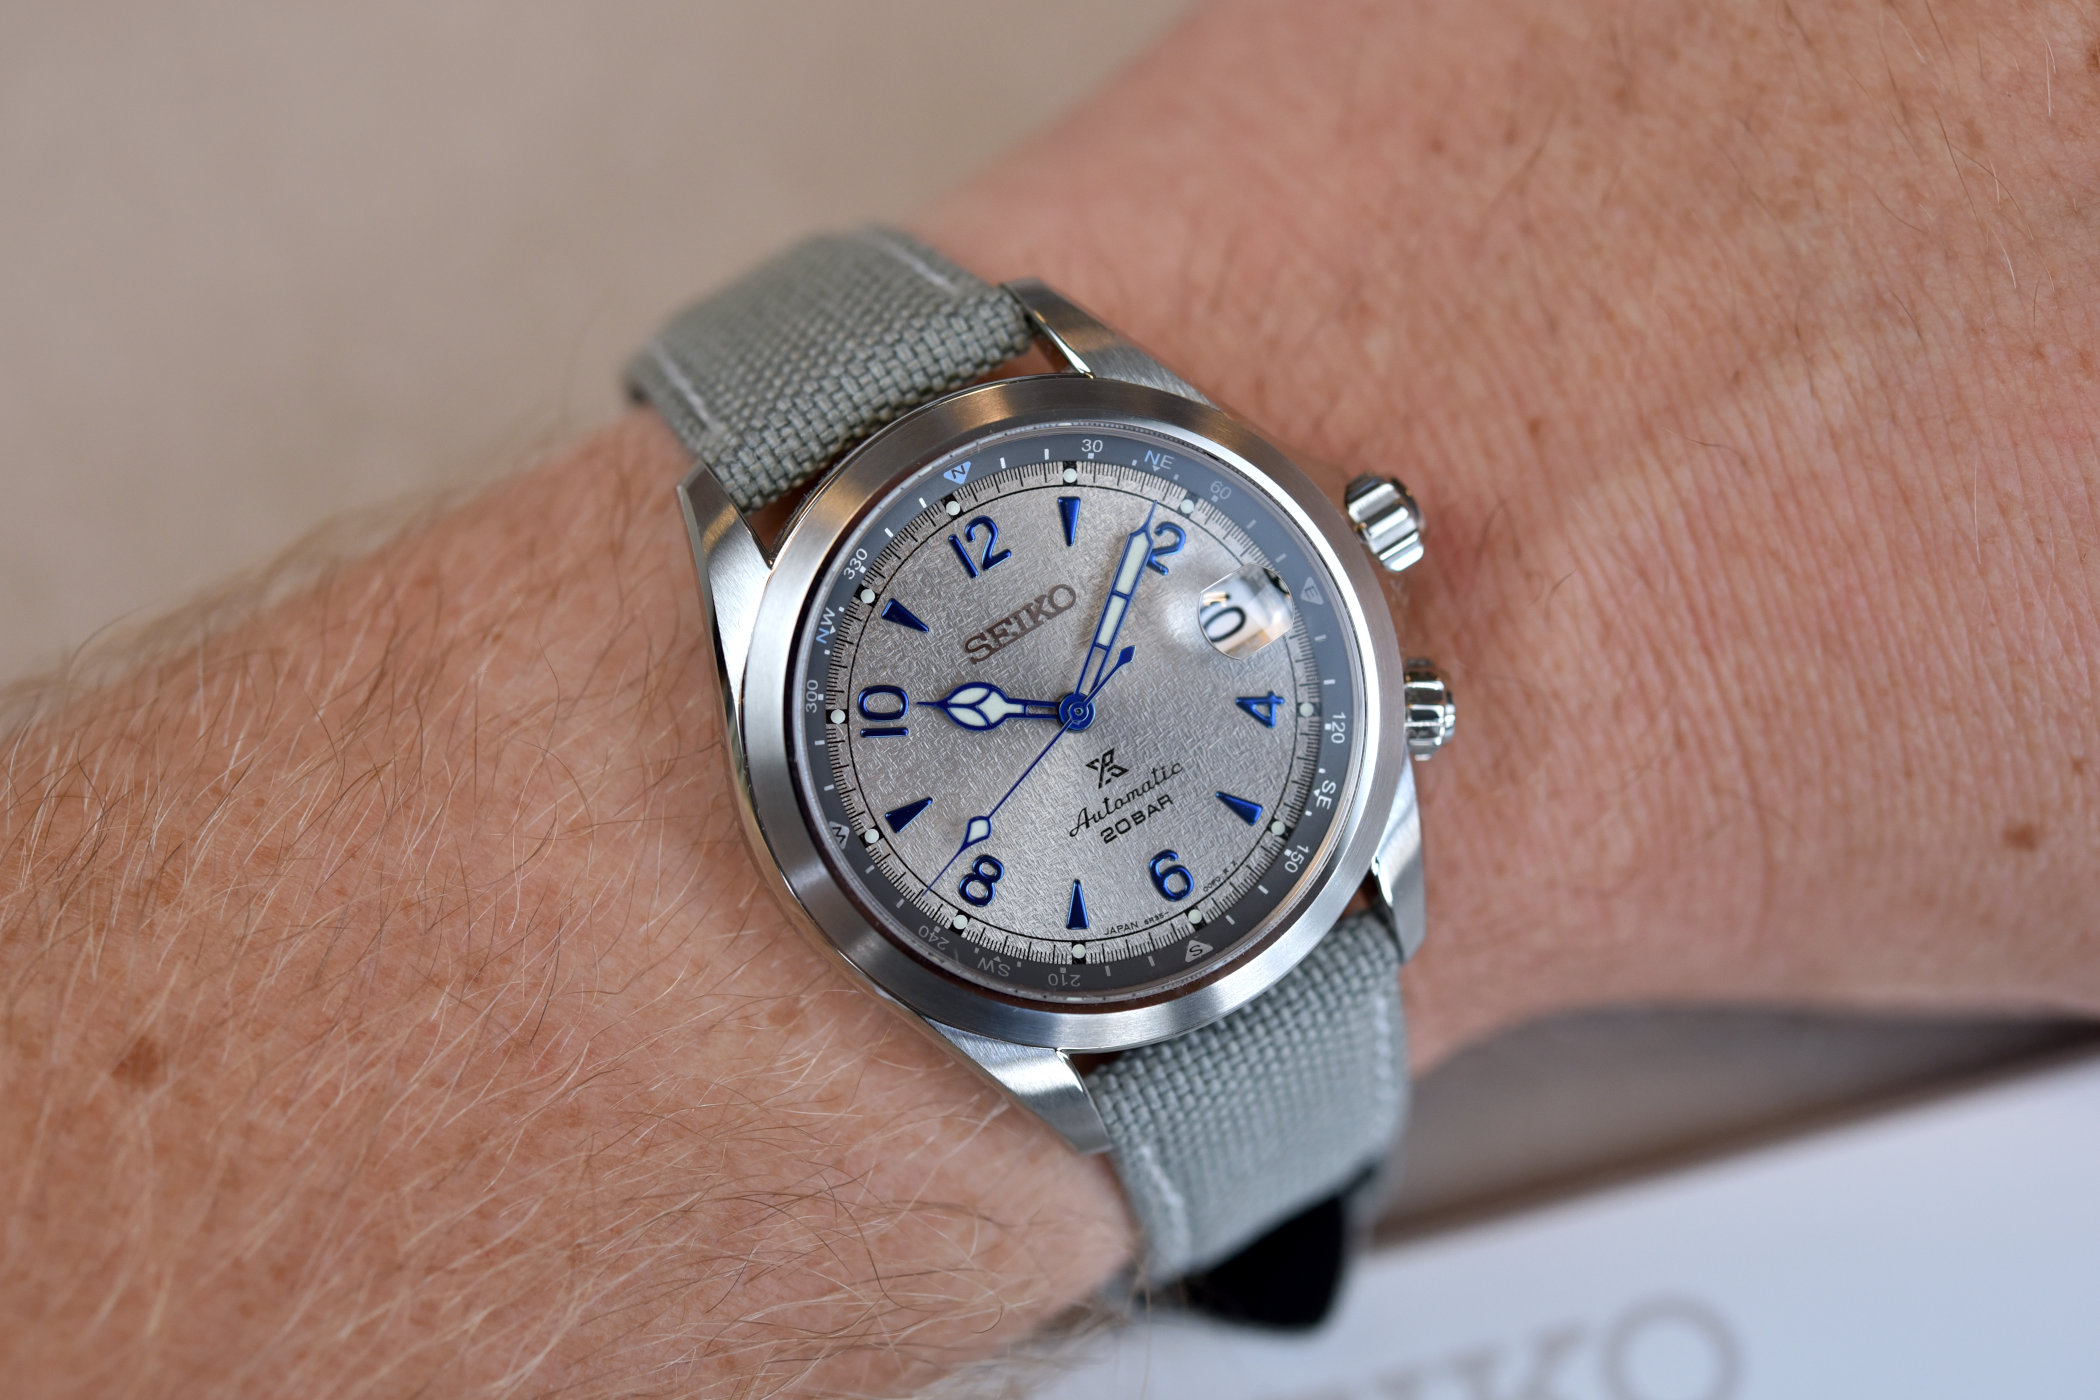 Introducing – The European-Only Seiko Prospex Alpinist “Rock Face” SPB355J1  (Live Pics & Price) - WATCHLOUNGE